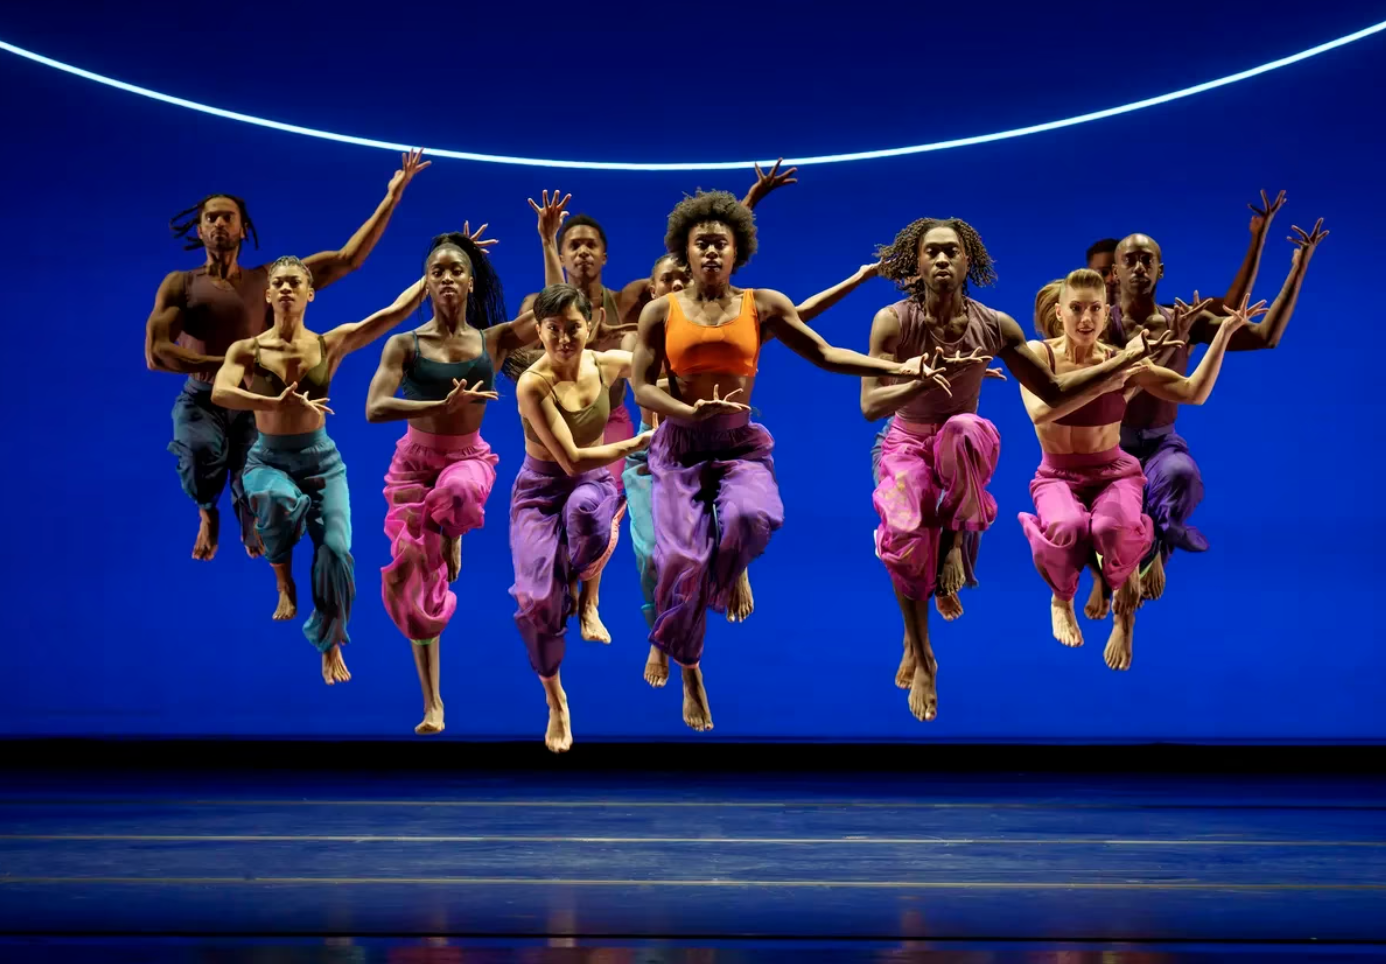 Several dancers wearing brightly coloured tank tops and loose pants leap as one into the air, onstage with a dark blue background.